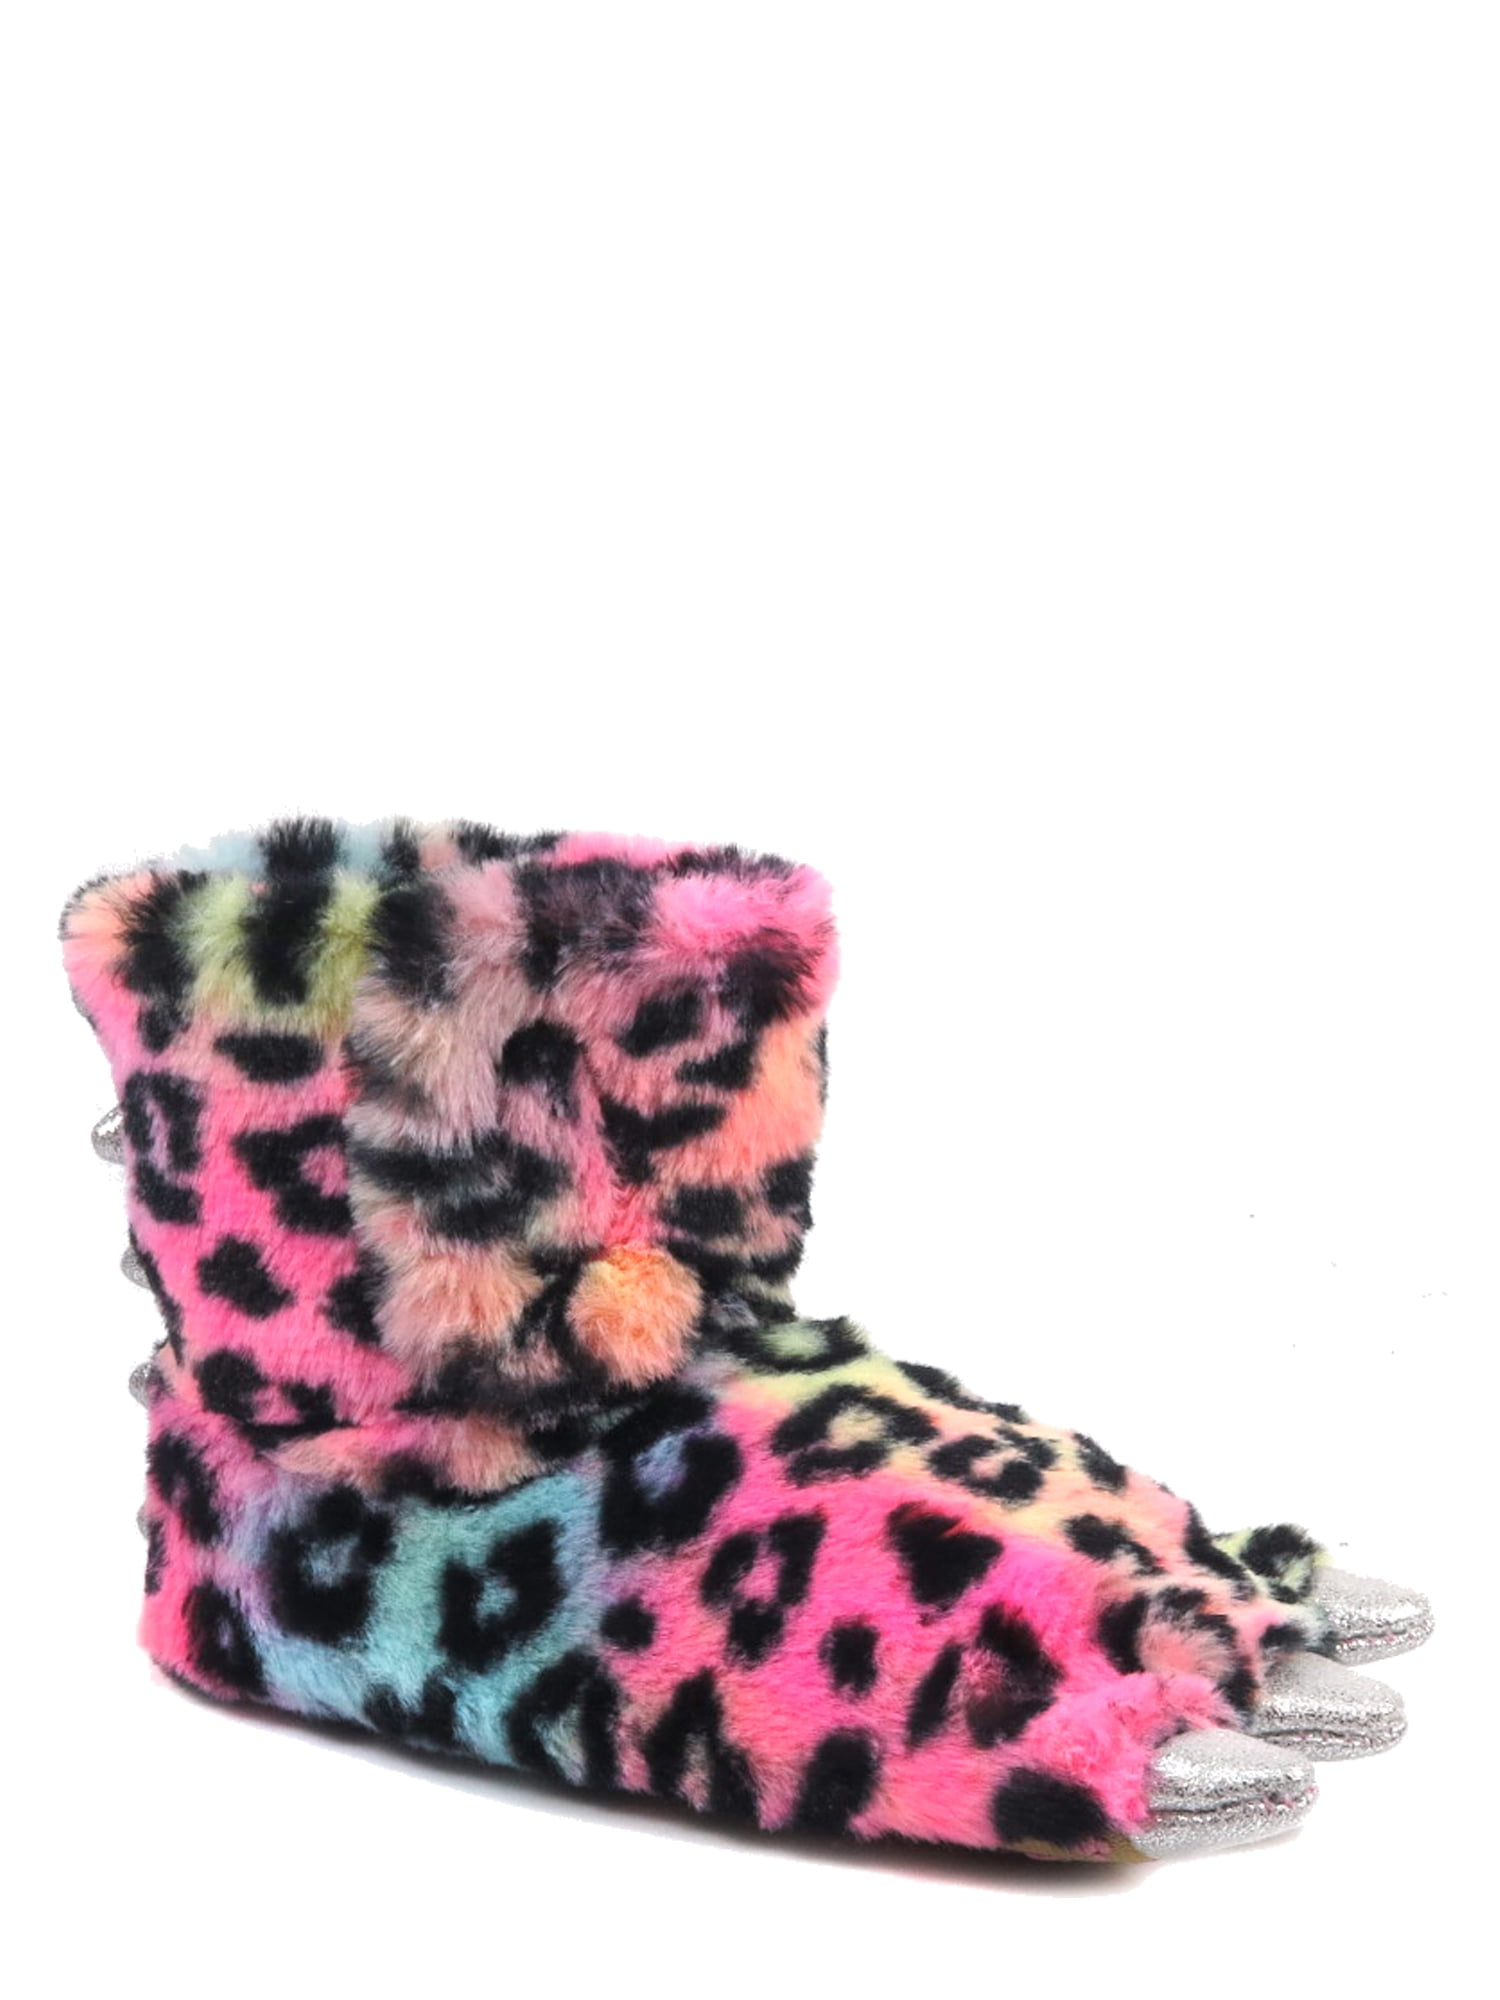 outdoor use Wonder Nation Leopard slippers for indoor 